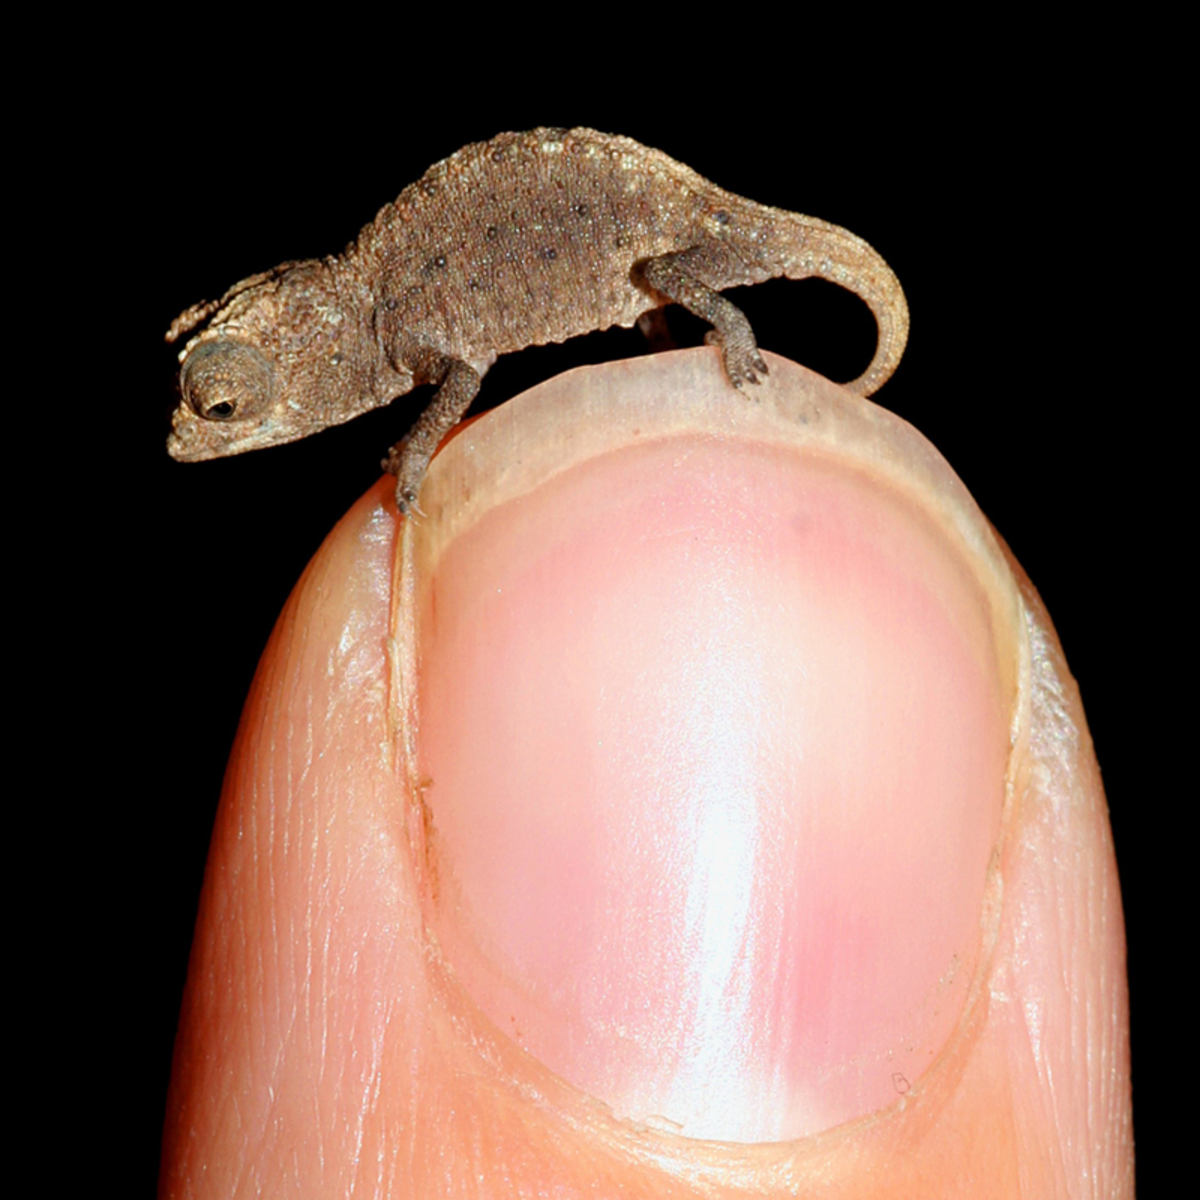 The smallest living reptile is the dwarf gecko. Adults are only 16 mm long.